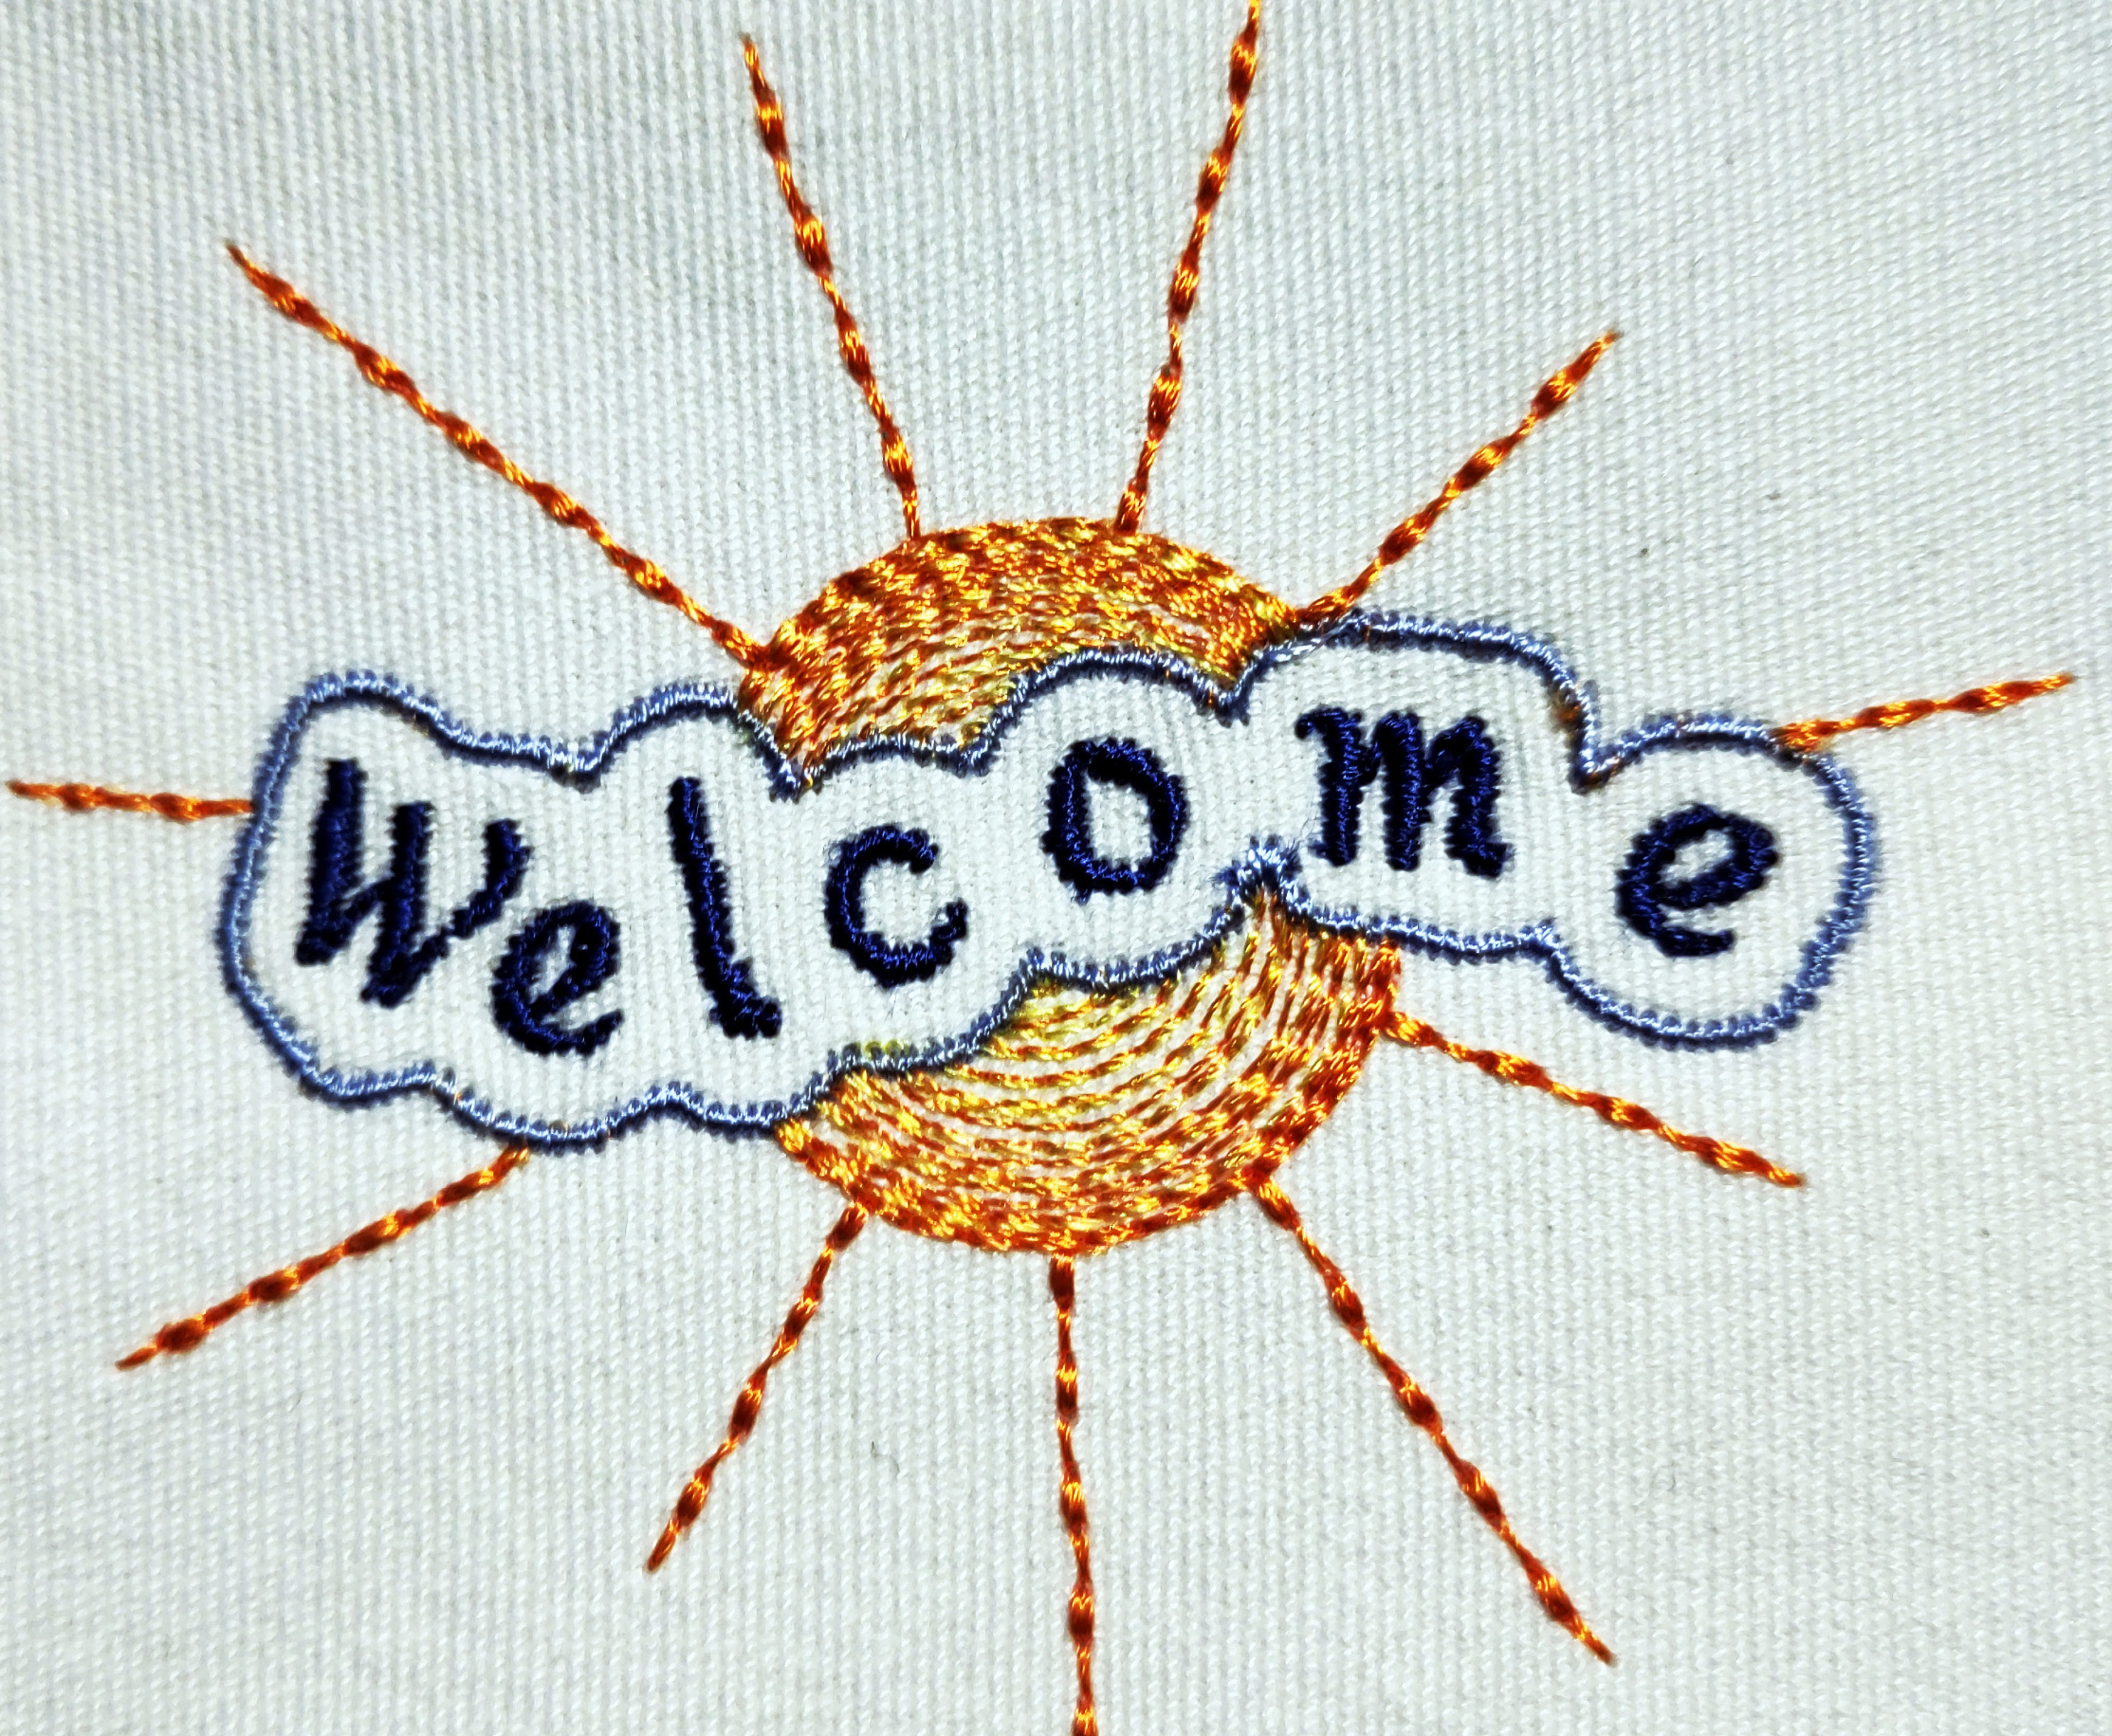 Embroidery stating "welcome"